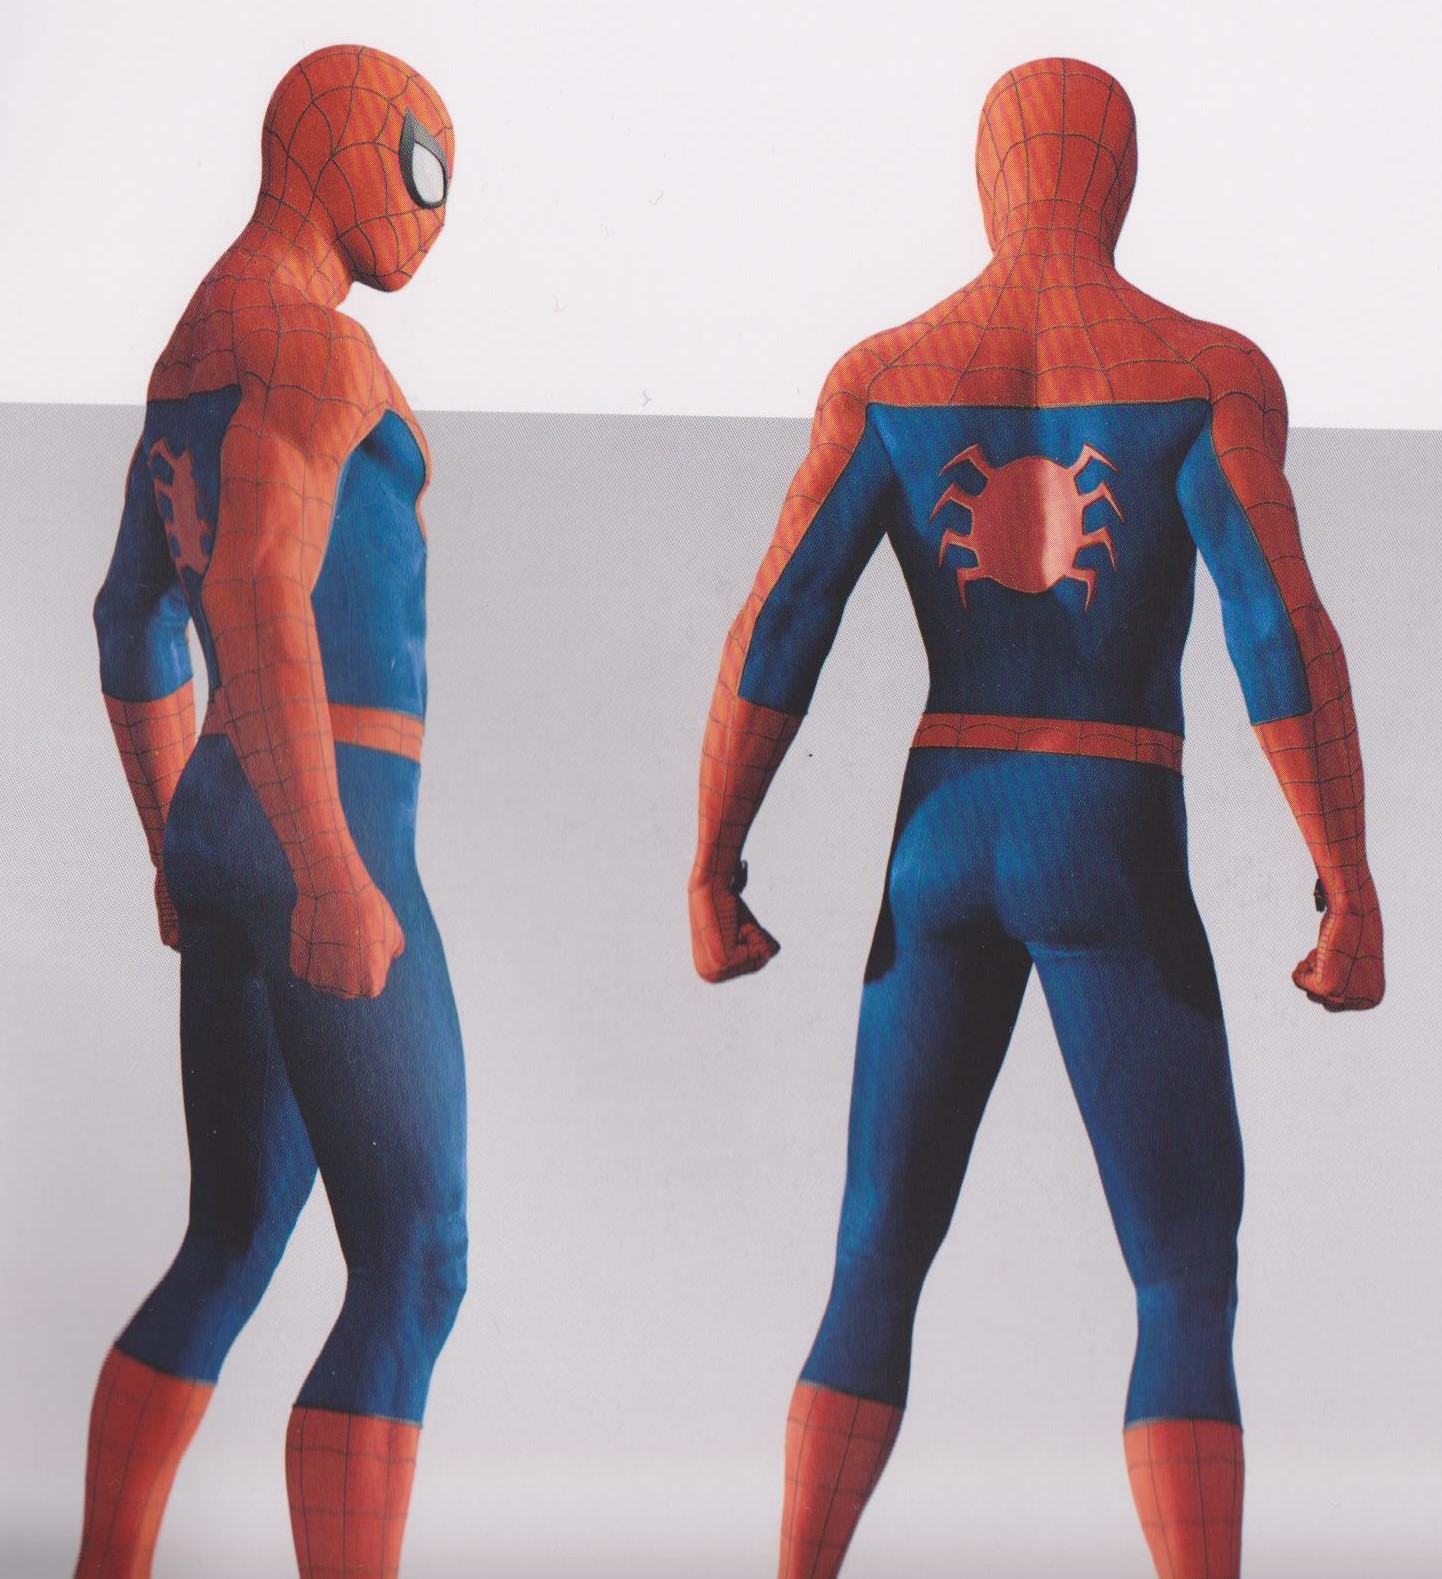 SPIDER-MAN PS4 Concept Art Reveals Alternate Designs For The Wall